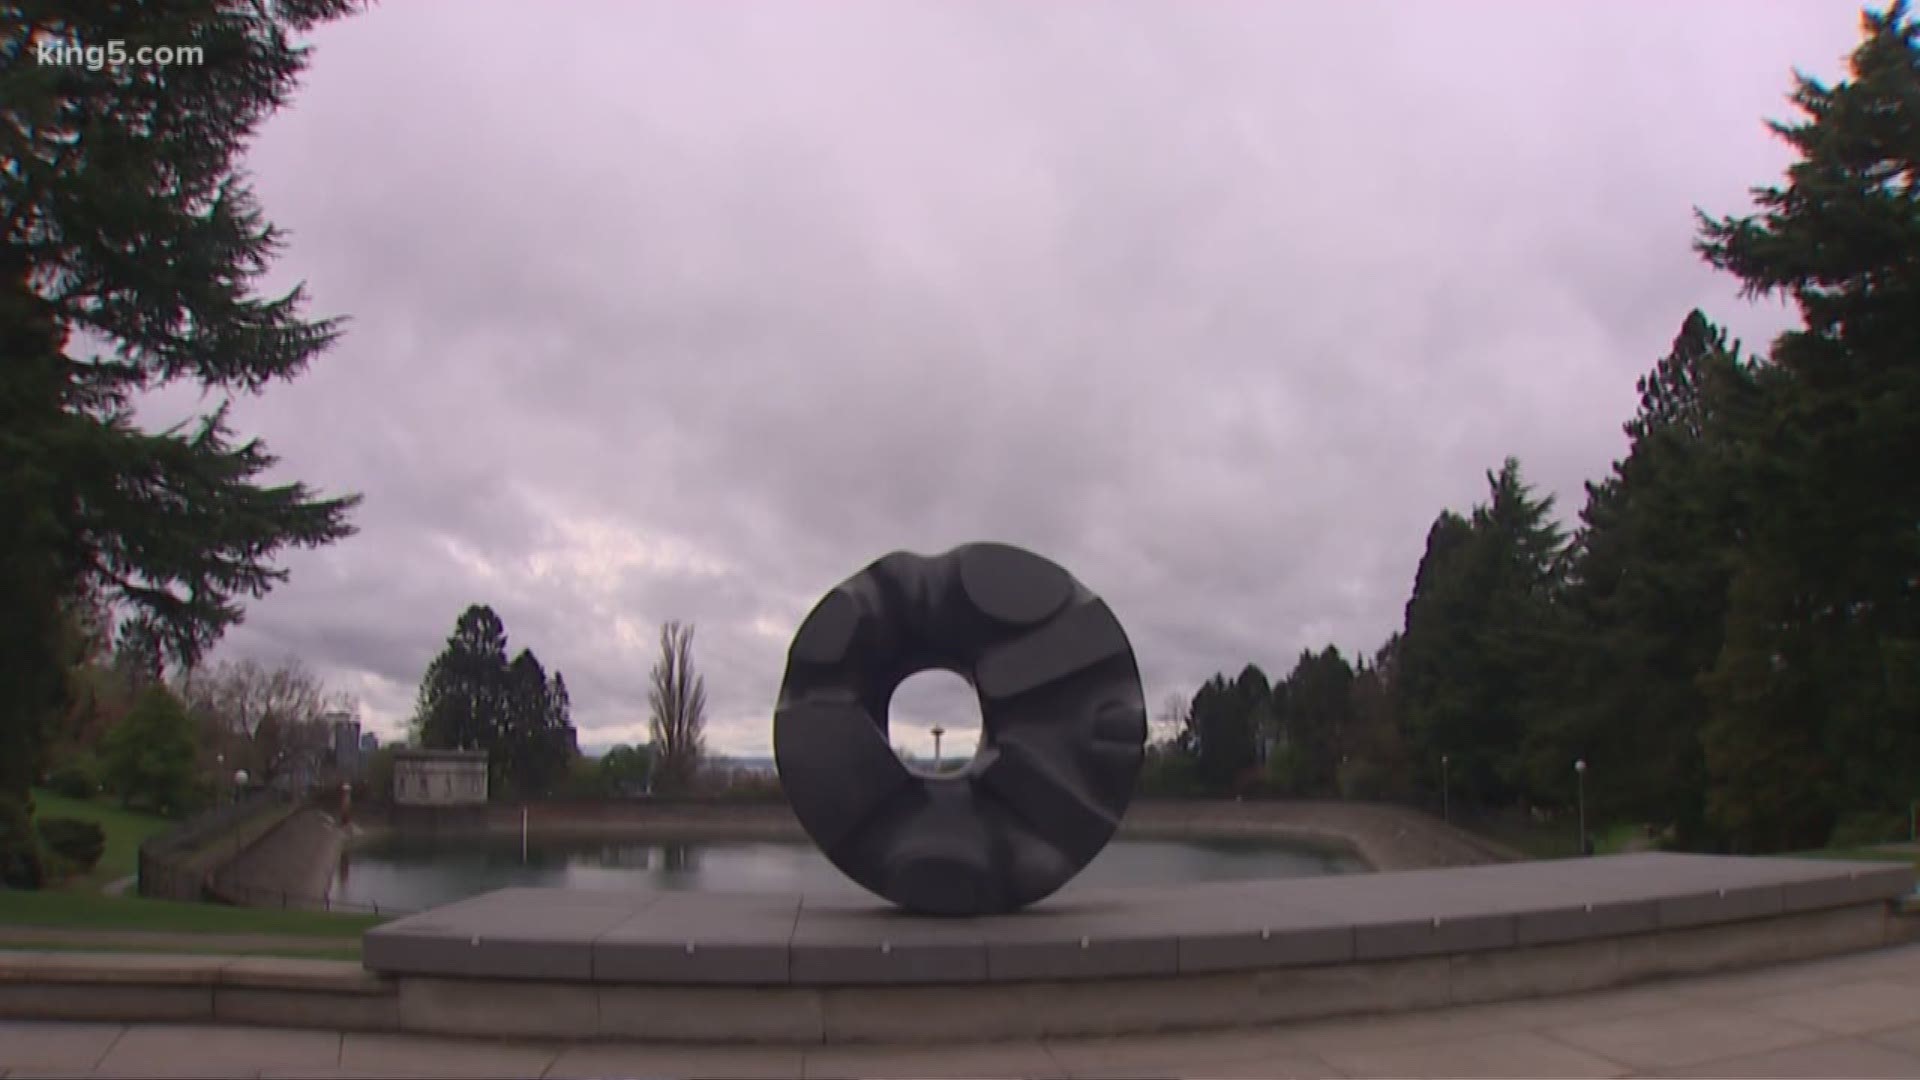 Researchers at the University of Washington are excited about the other possibilities that come with the first image of a black hole. KING 5's Michael Crowe reports.